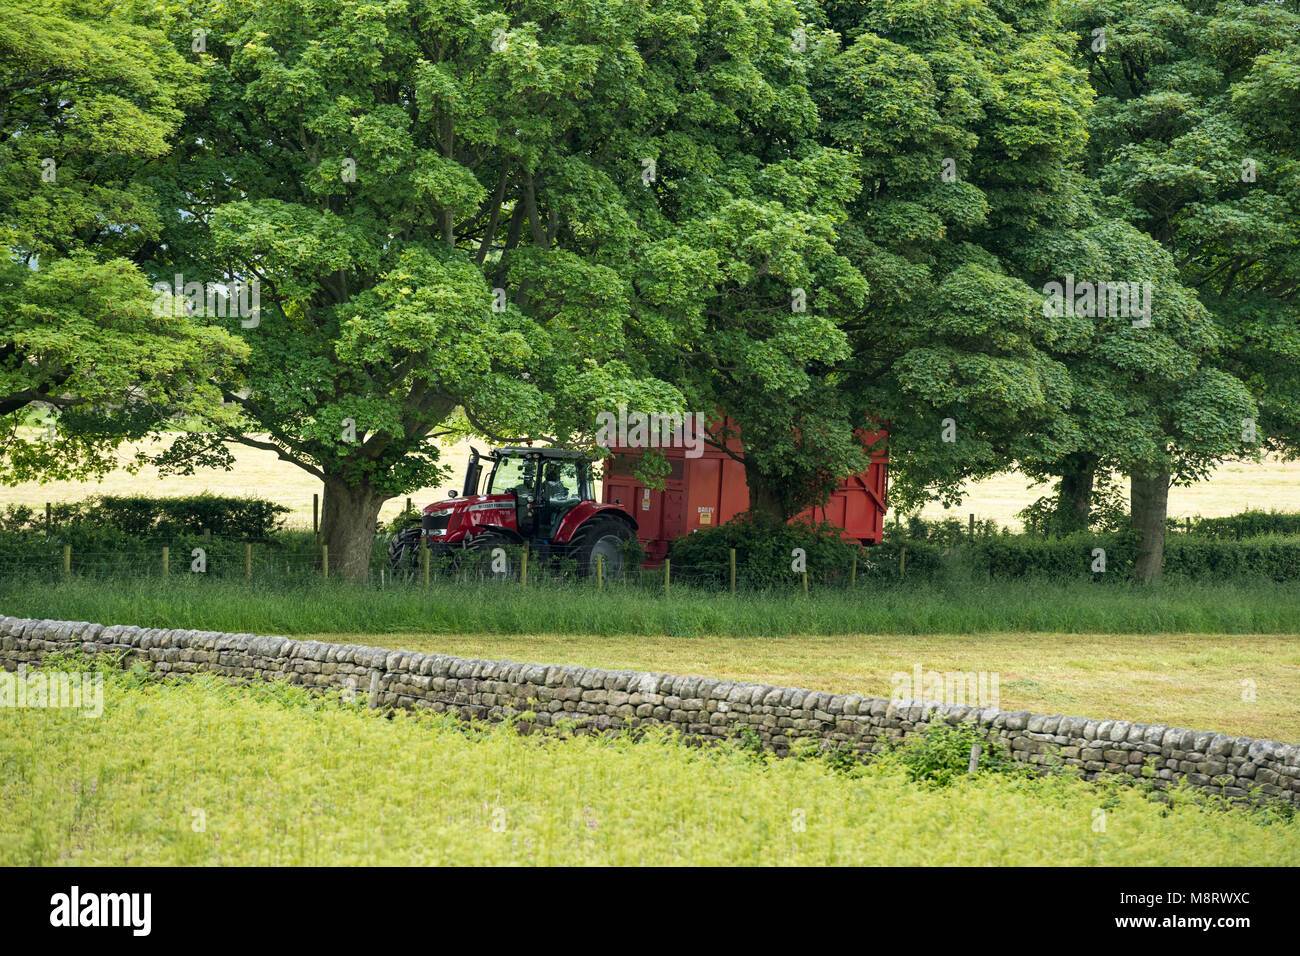 Travelling on narrow tree-lined track, bright, shiny, red tractor pulling trailer on farm track in scenic countryside - West Yorkshire, England, UK. Stock Photo